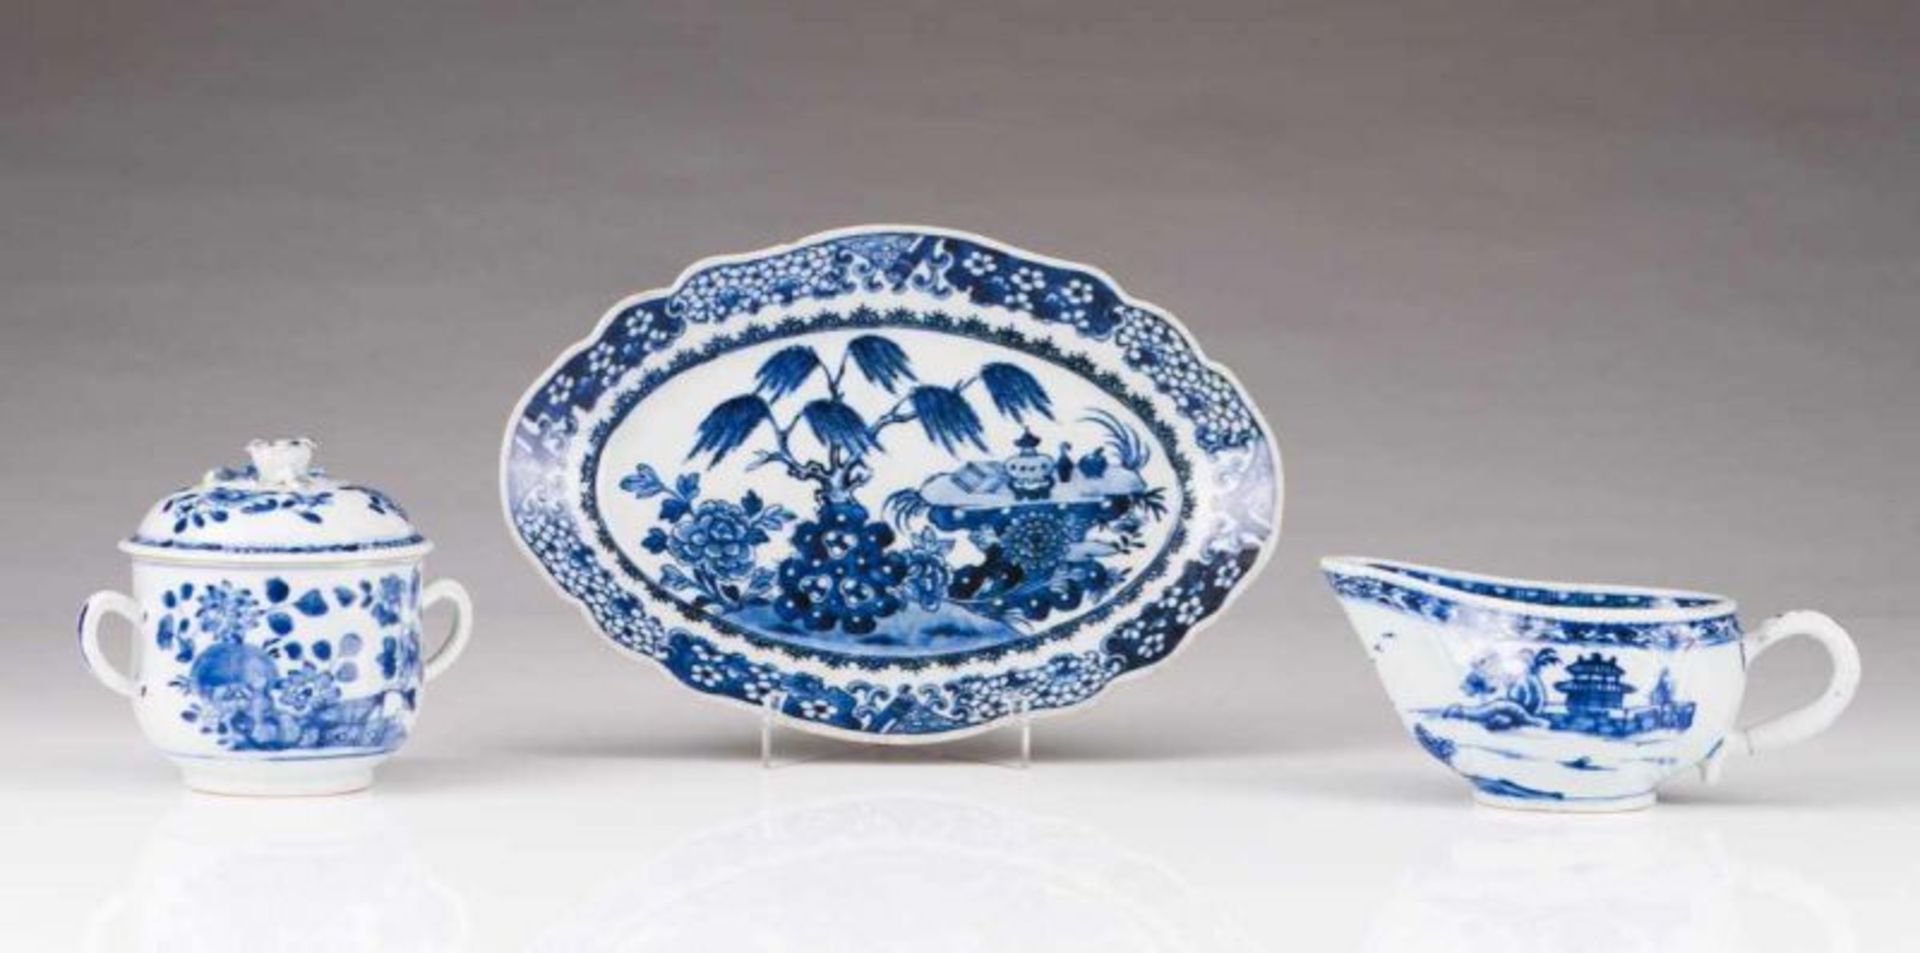 An oval dish Chinese export porcelain Blue decoration depicting garden with flowers and objects